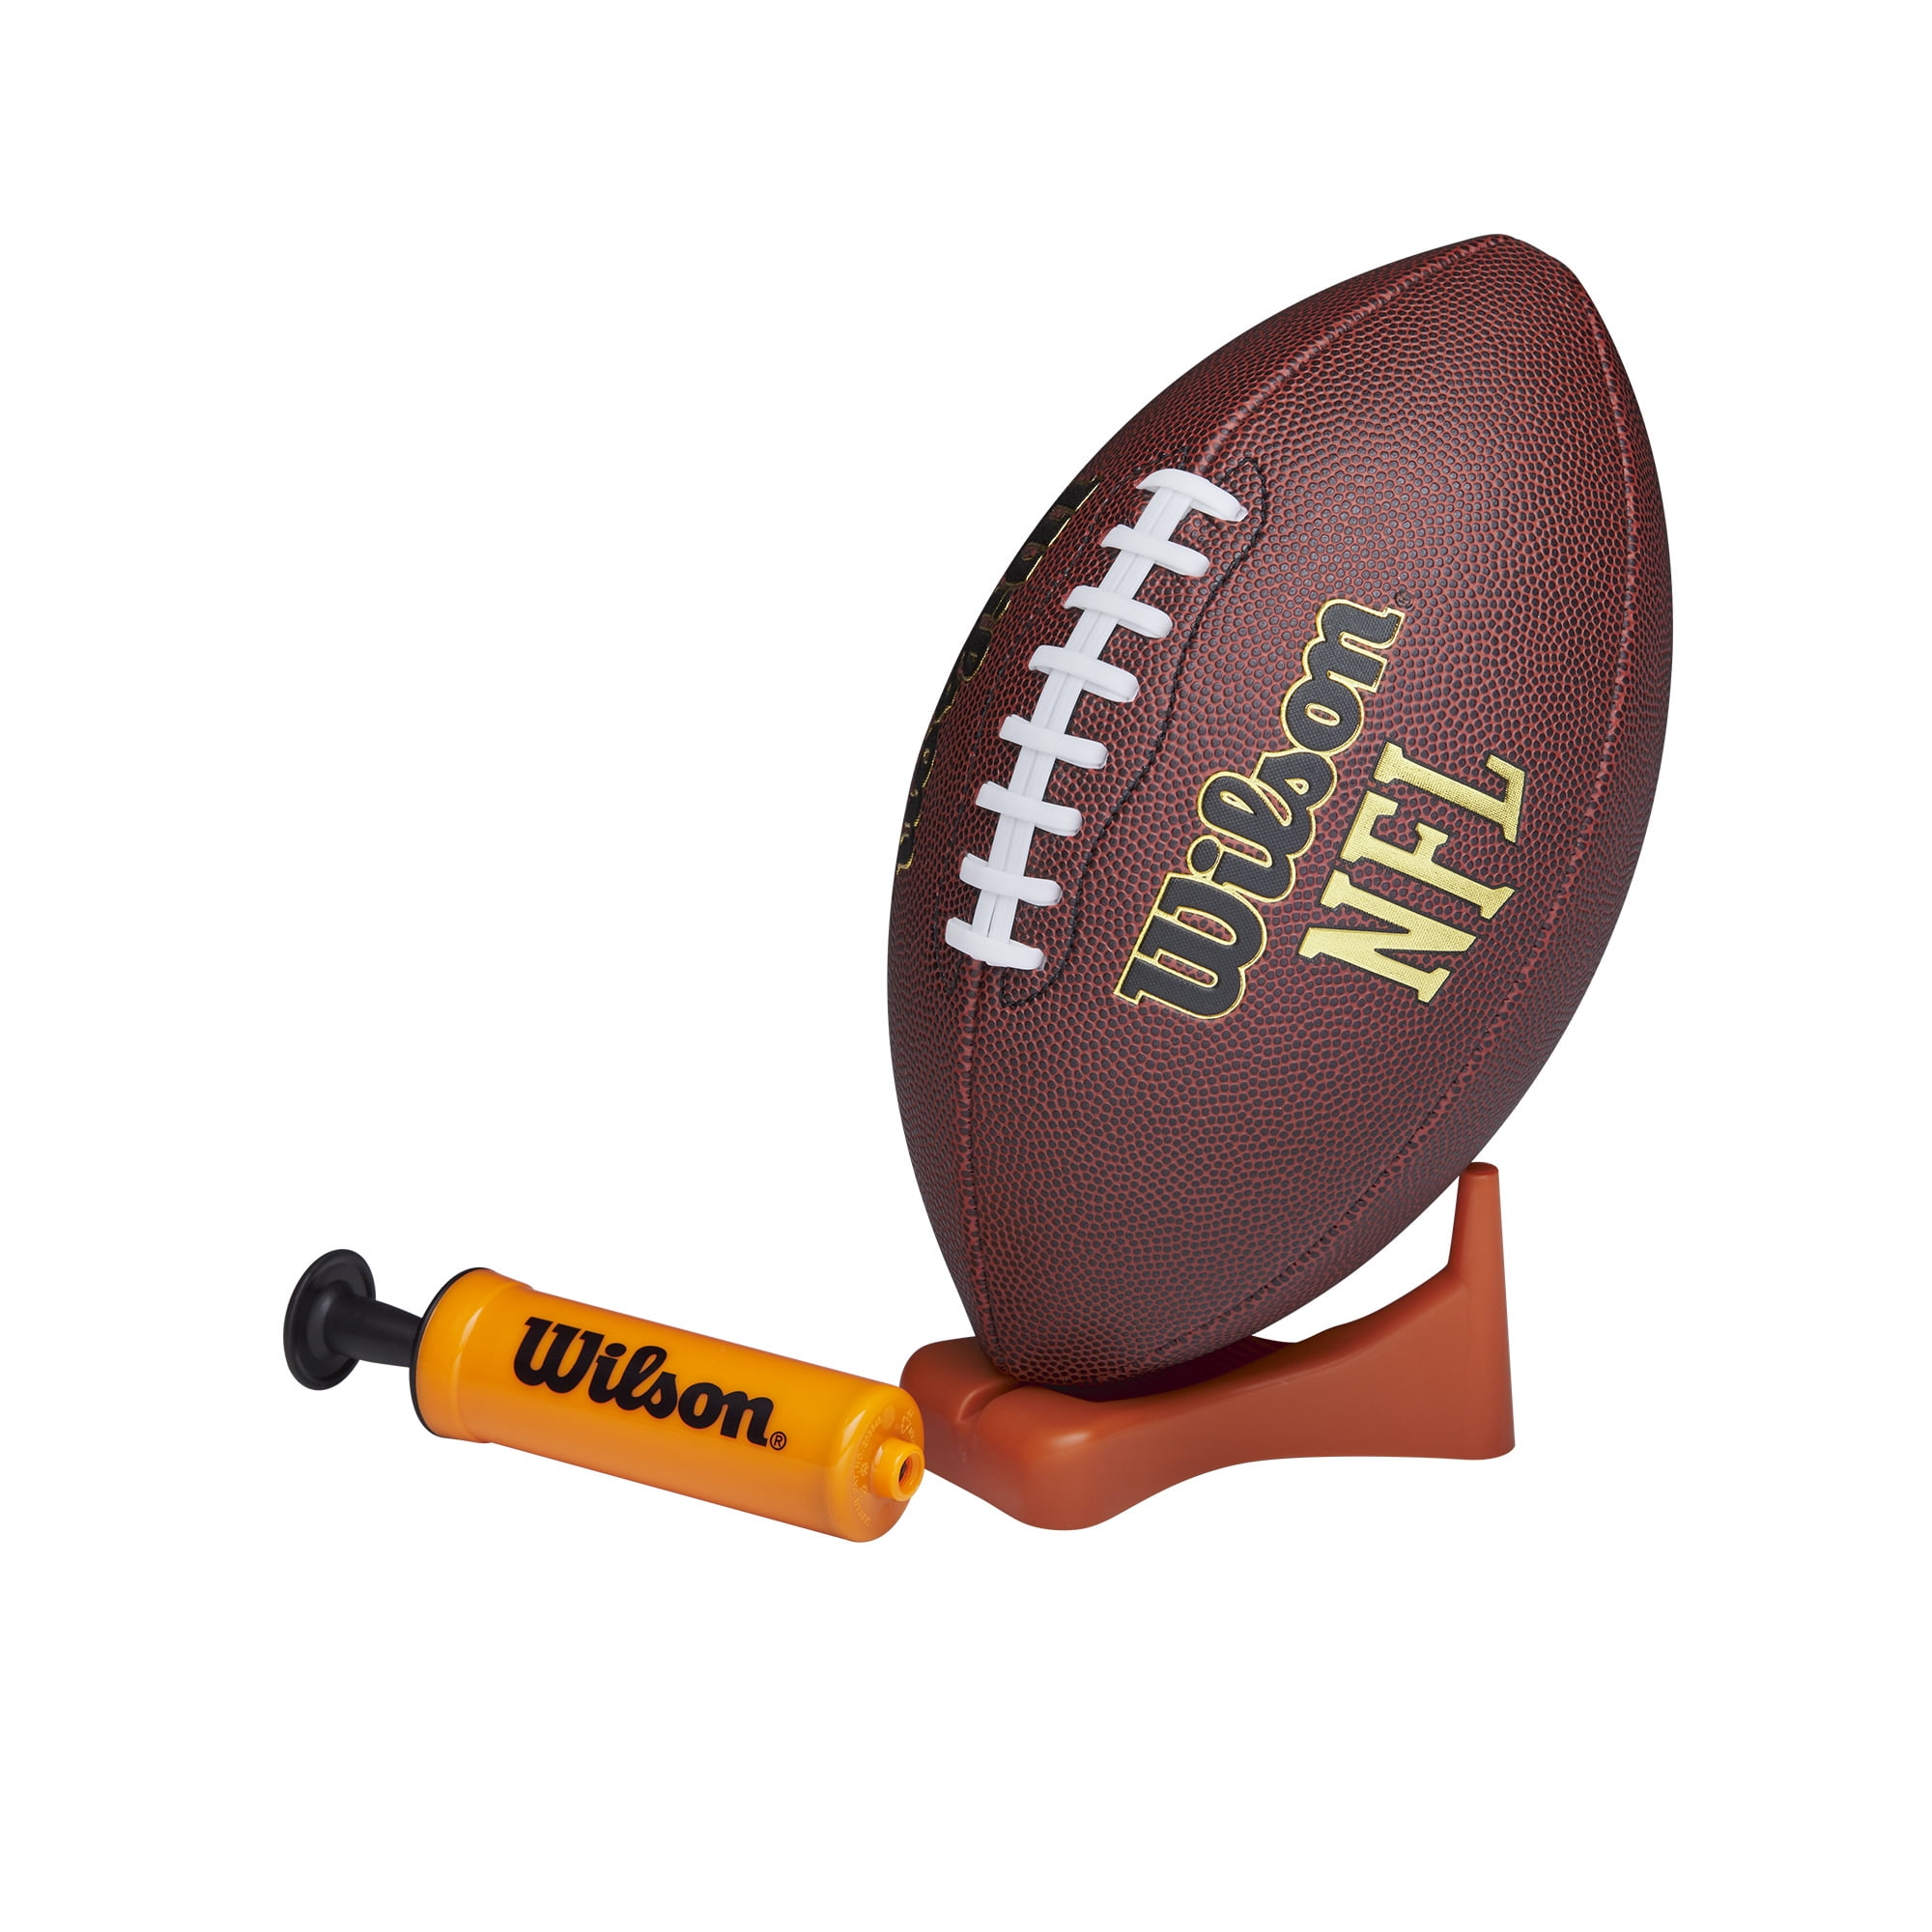 All Sizes FREE 2 DAY SHIPPING Details about   Wilson NCAA Red Zone Series Composite Football 